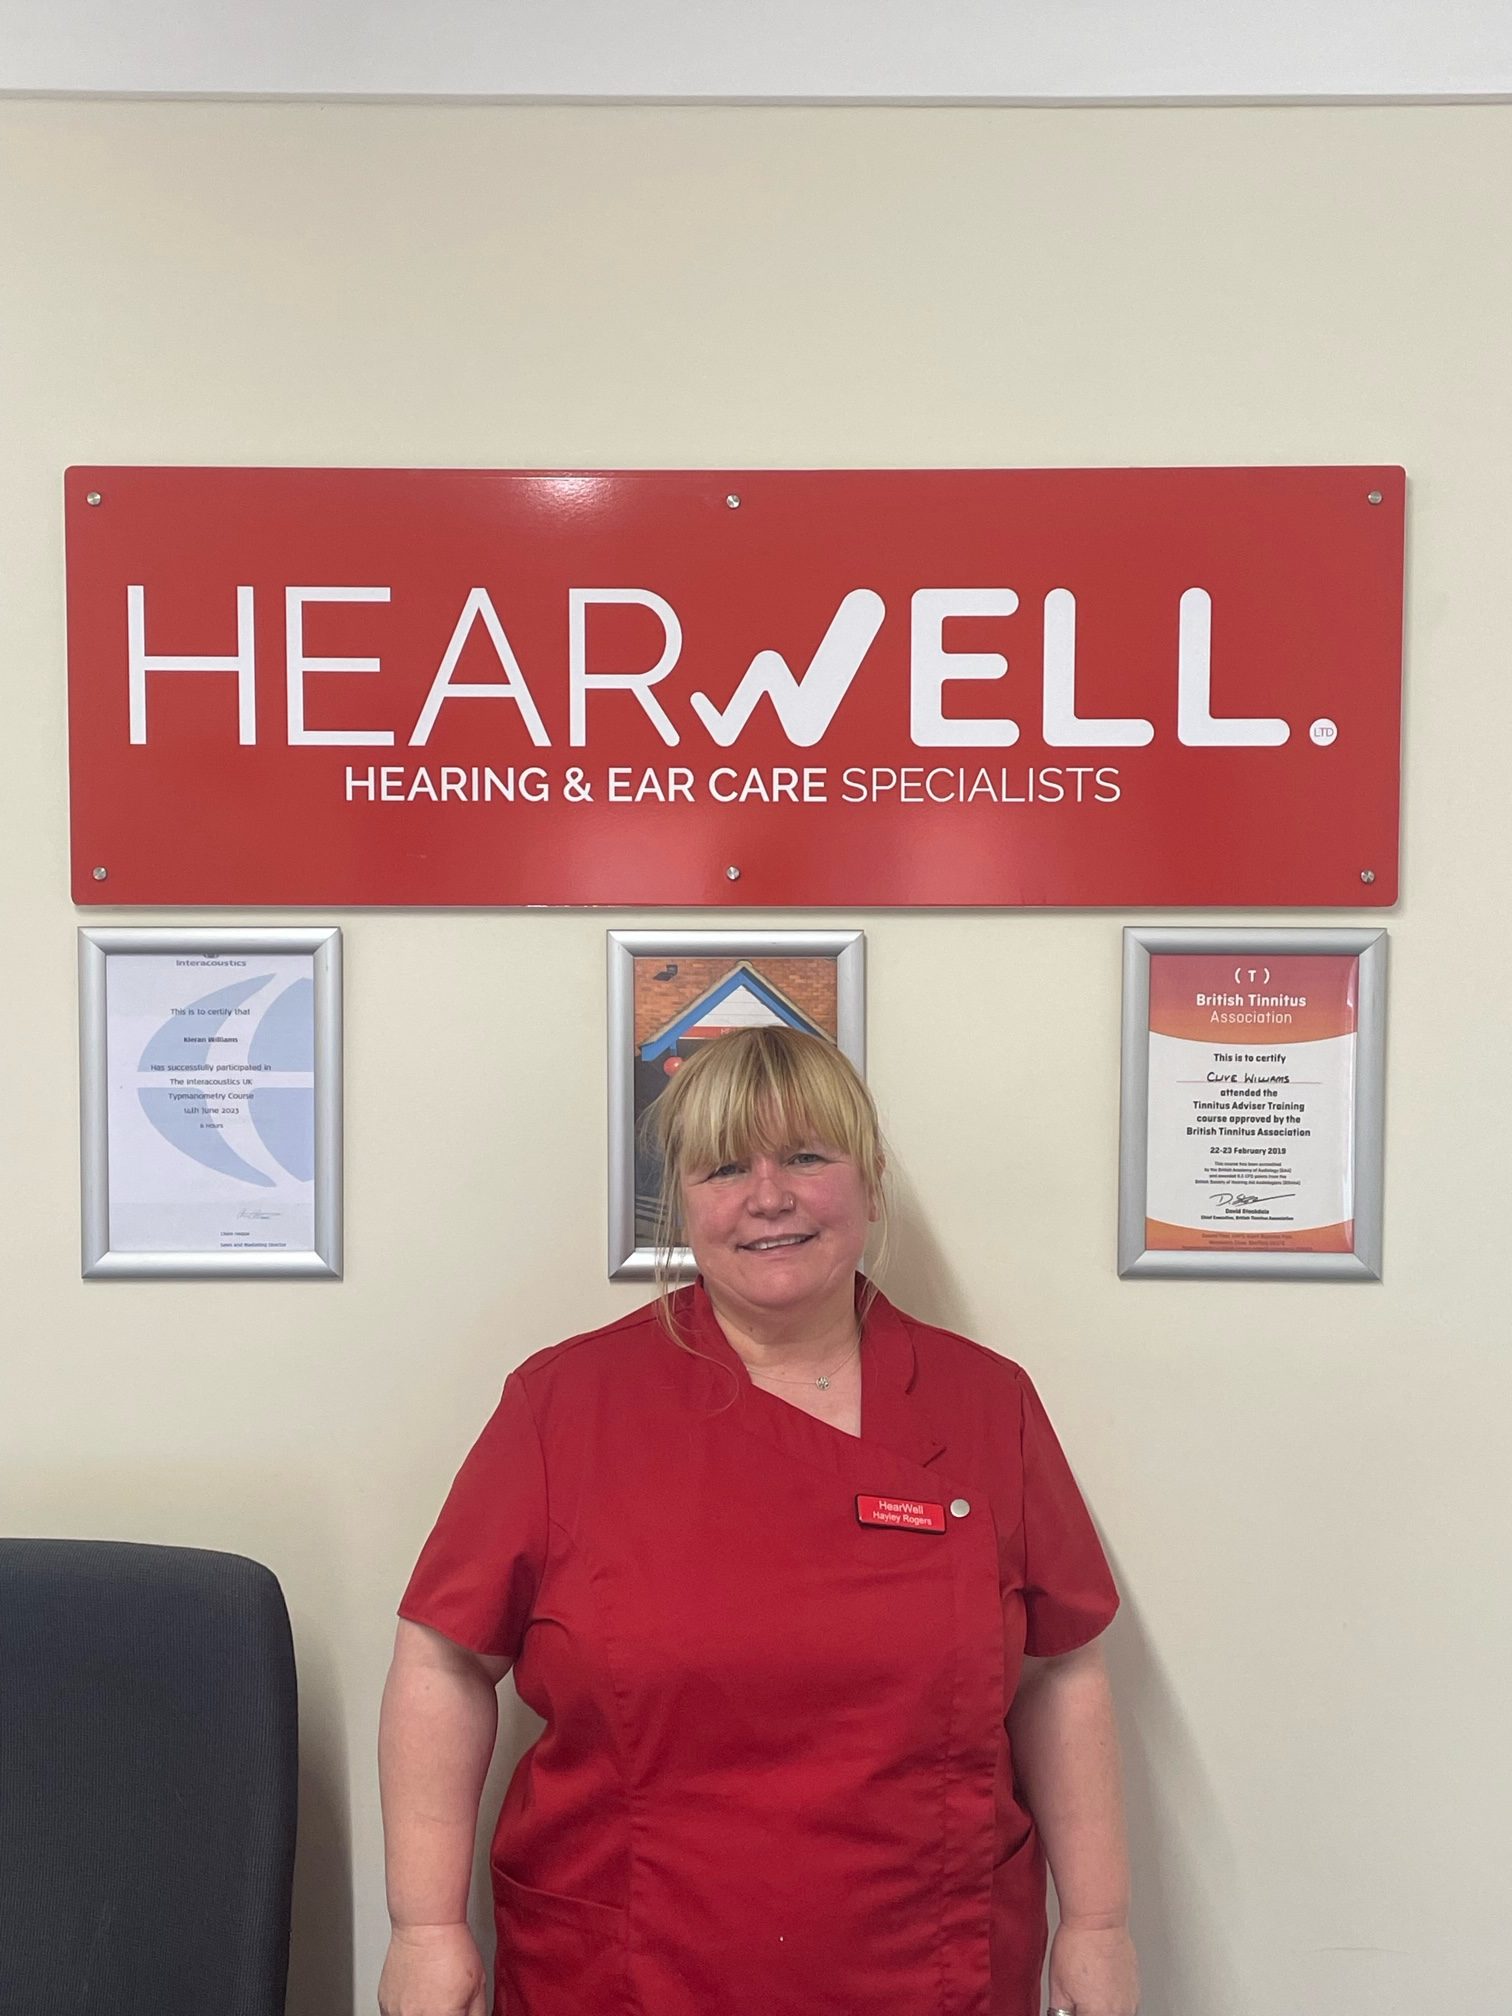 HearWell Hearing | Hearing Tests, Earwax Removal, Noise Protection, Hearing Aids | Hereford, Herefordshire